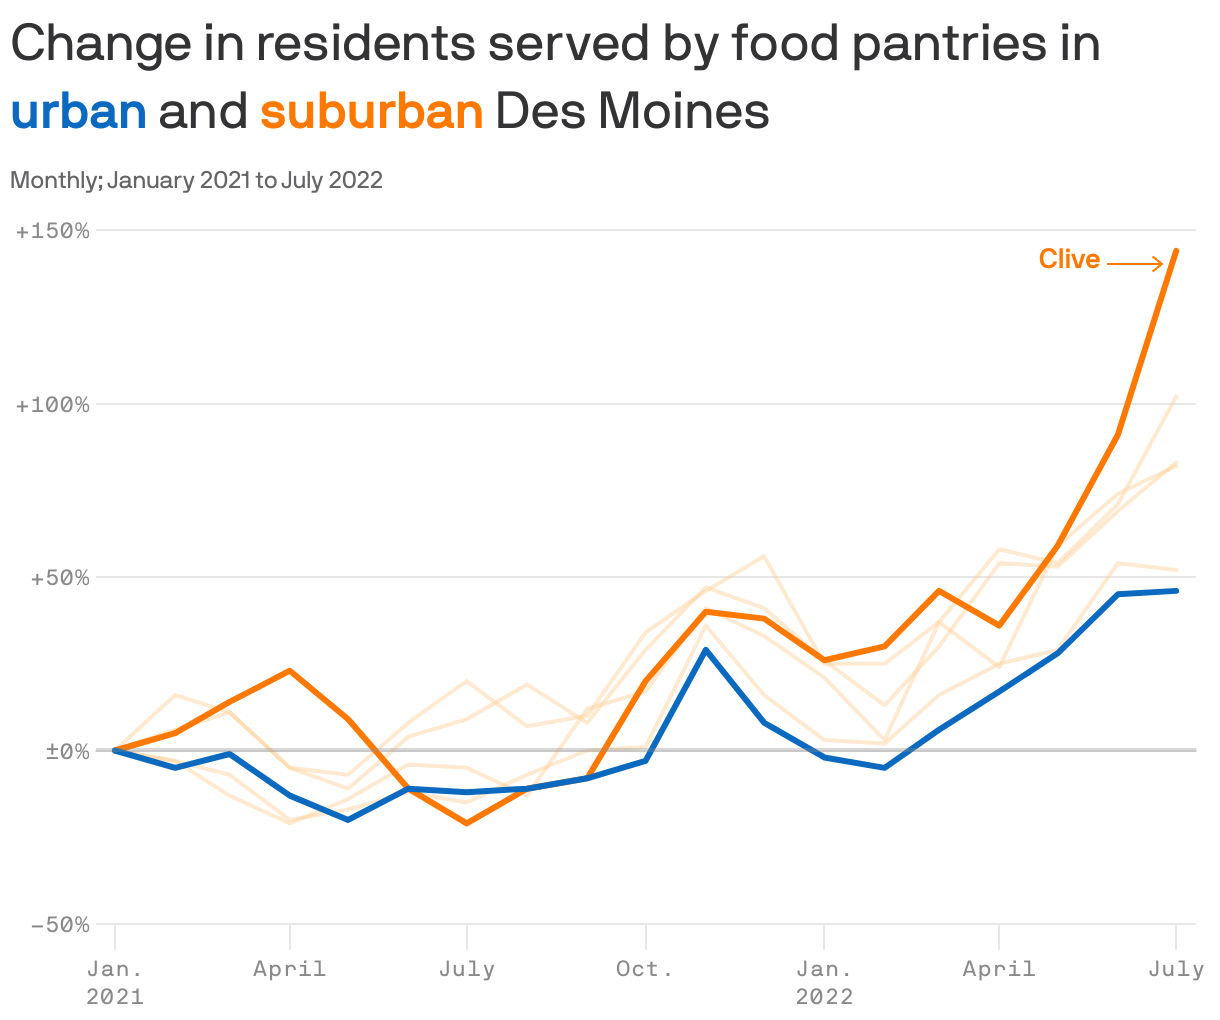 Change in residents served by food pantries in <b style='color: #0b6abf'>urban</b> and <b style='color: #ff7900;'>suburban</b> Des Moines